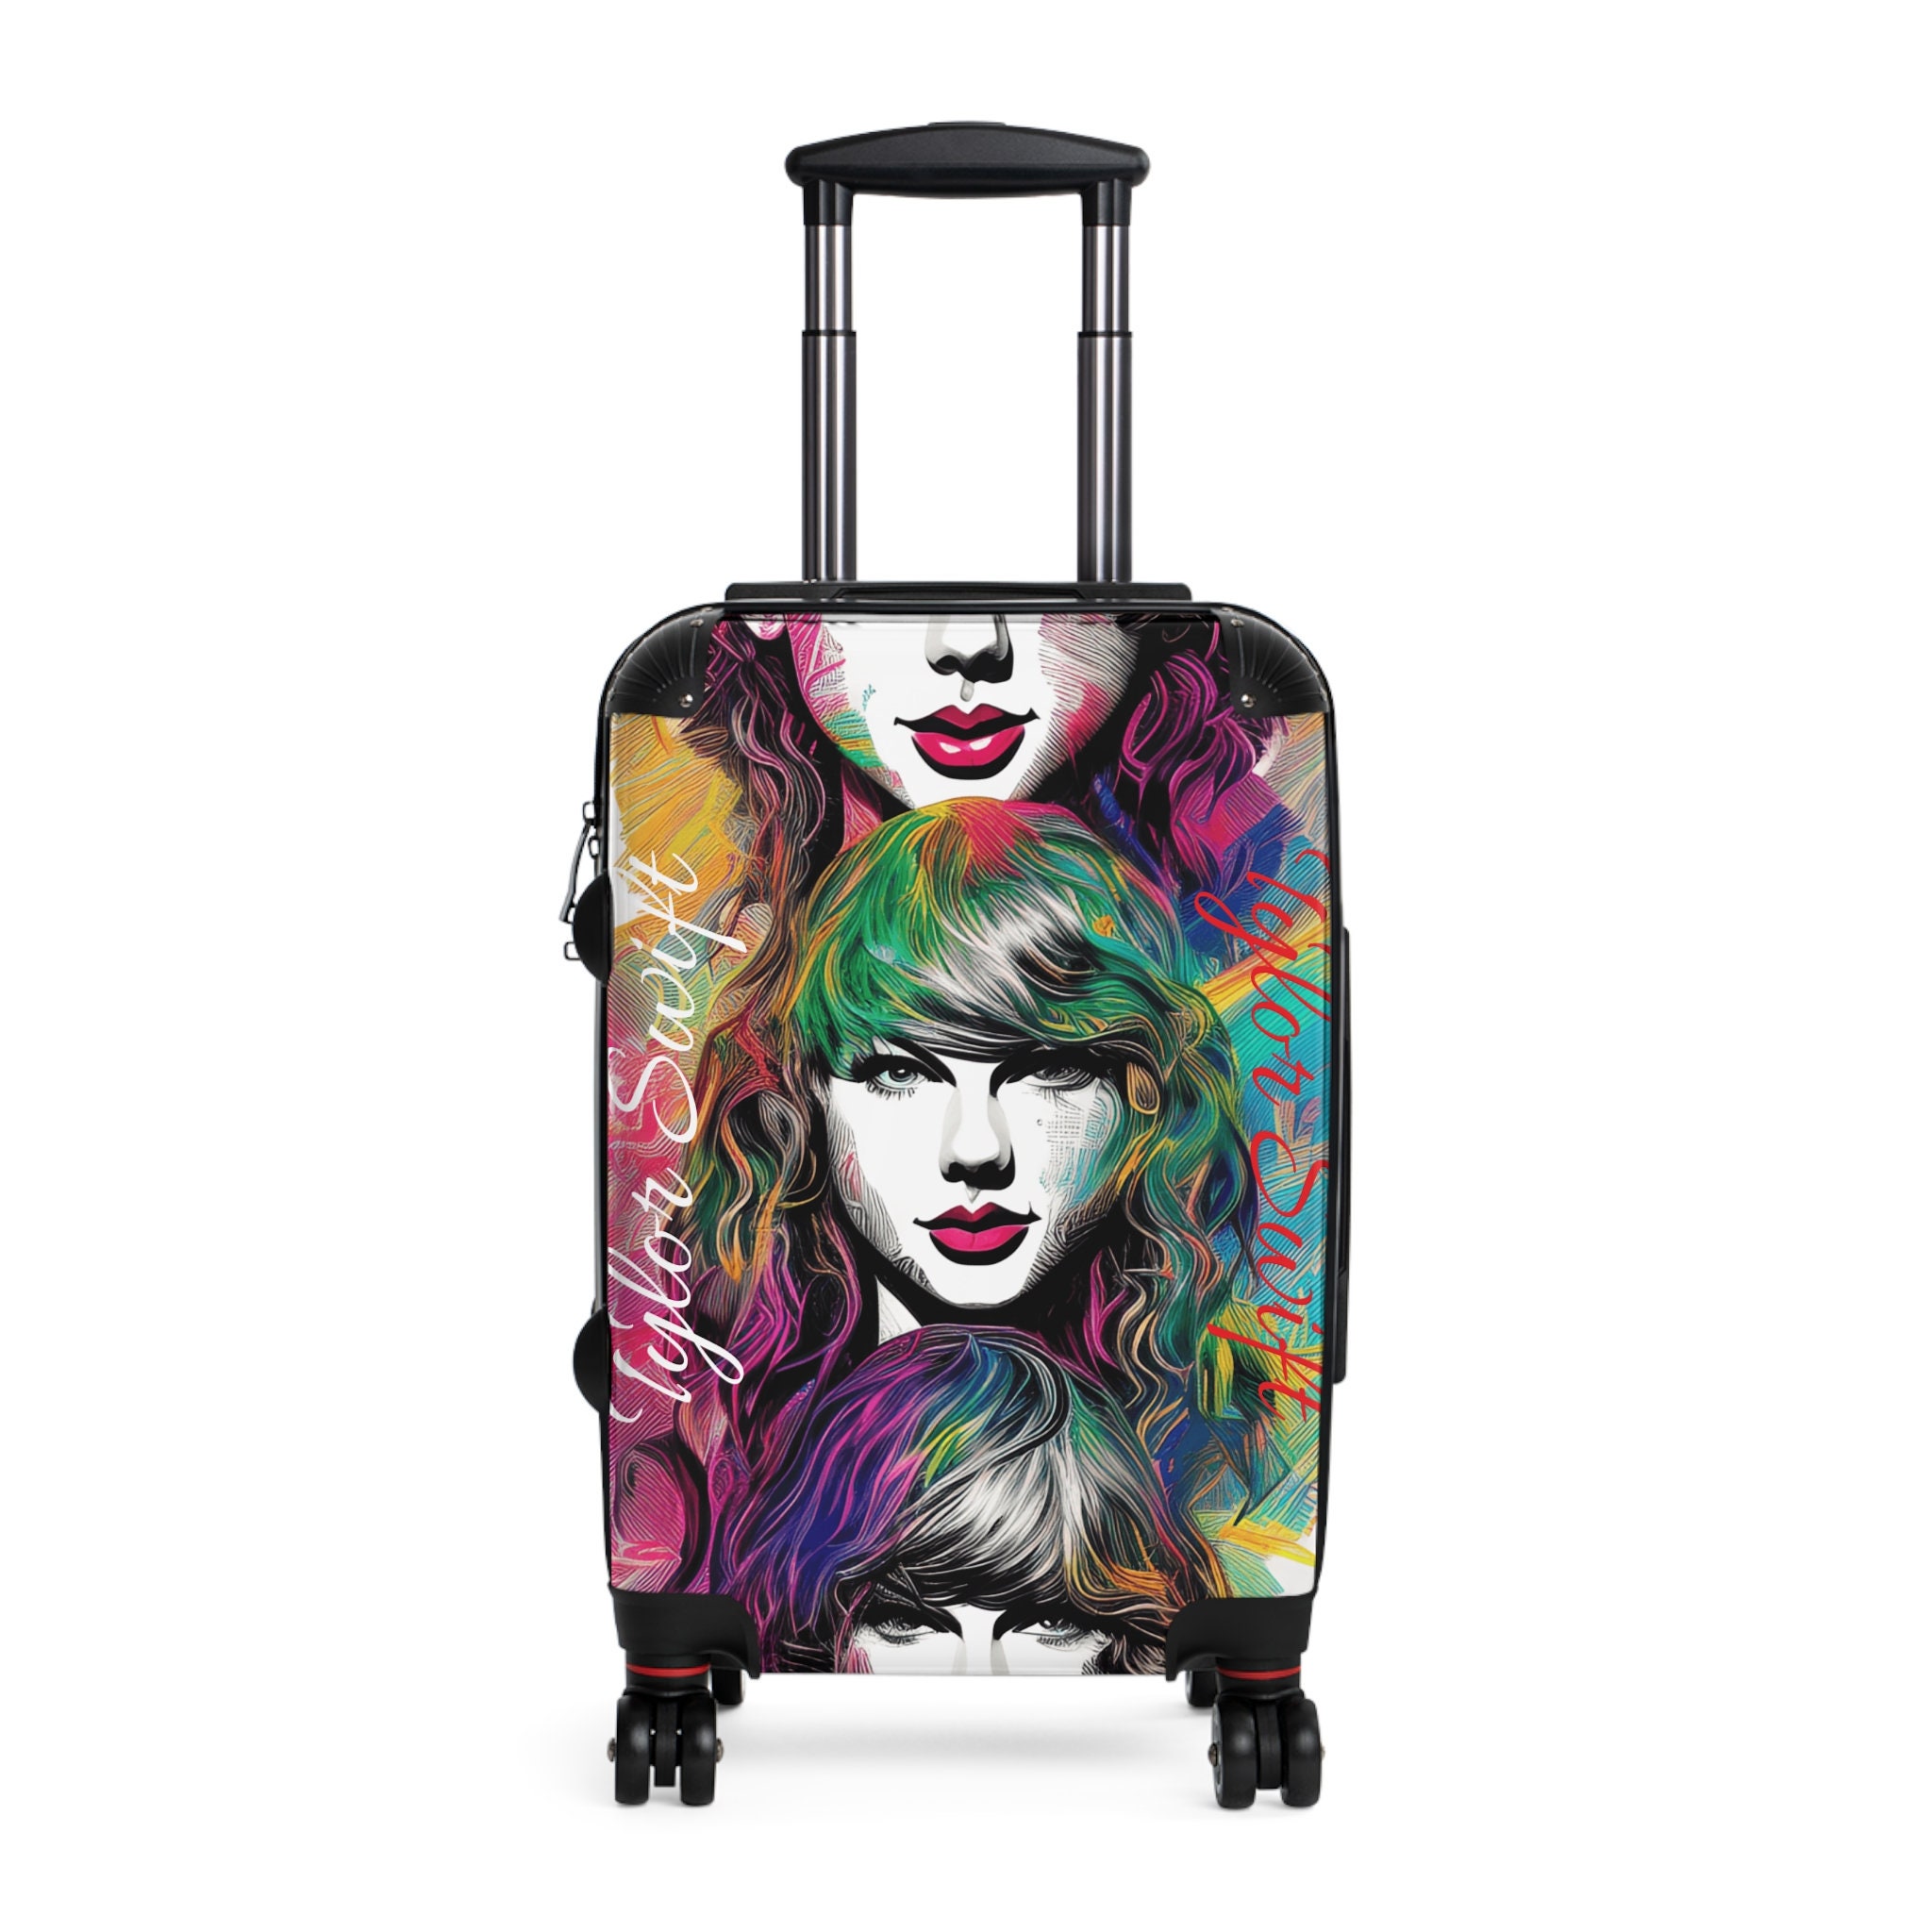 Taylor travel suitcase, Girl's travel luggage